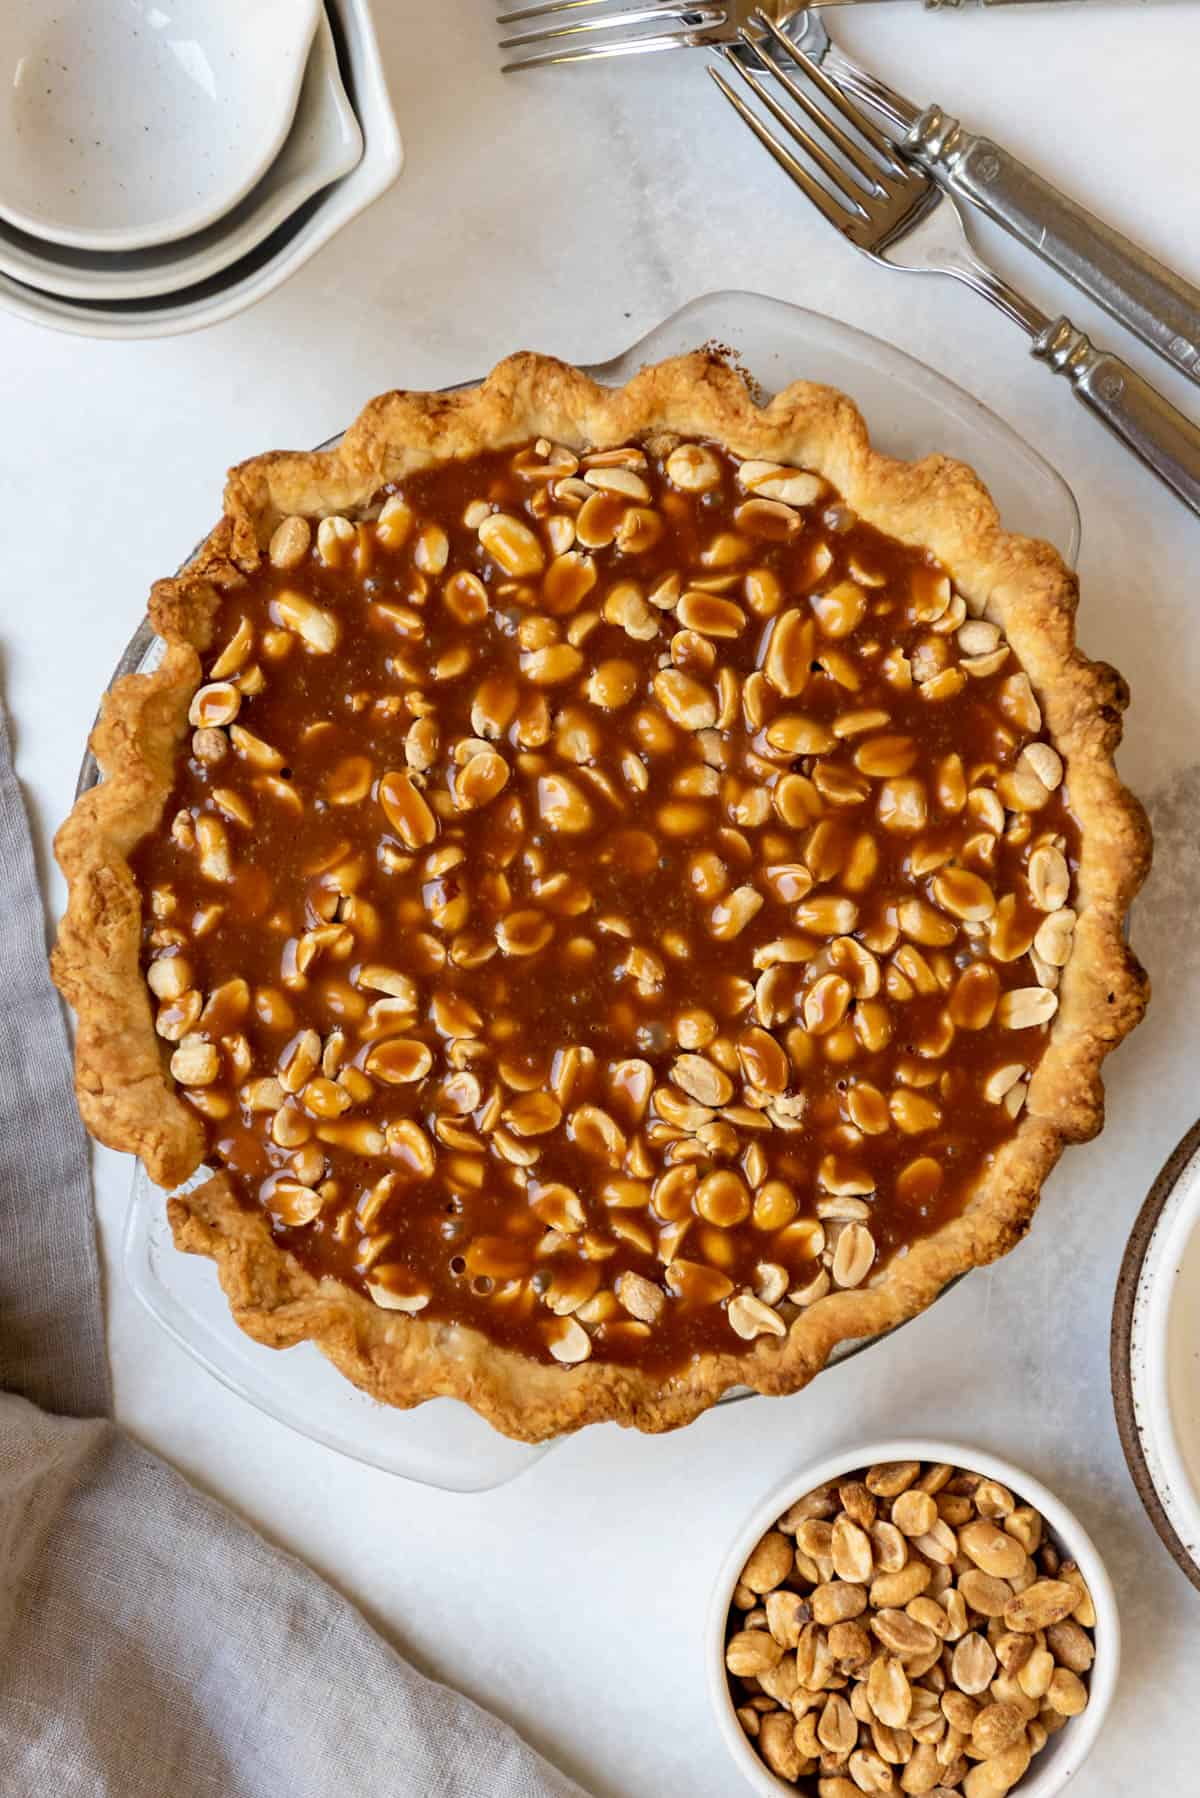 A finished Payday pie with peanuts, nougat, and caramel.